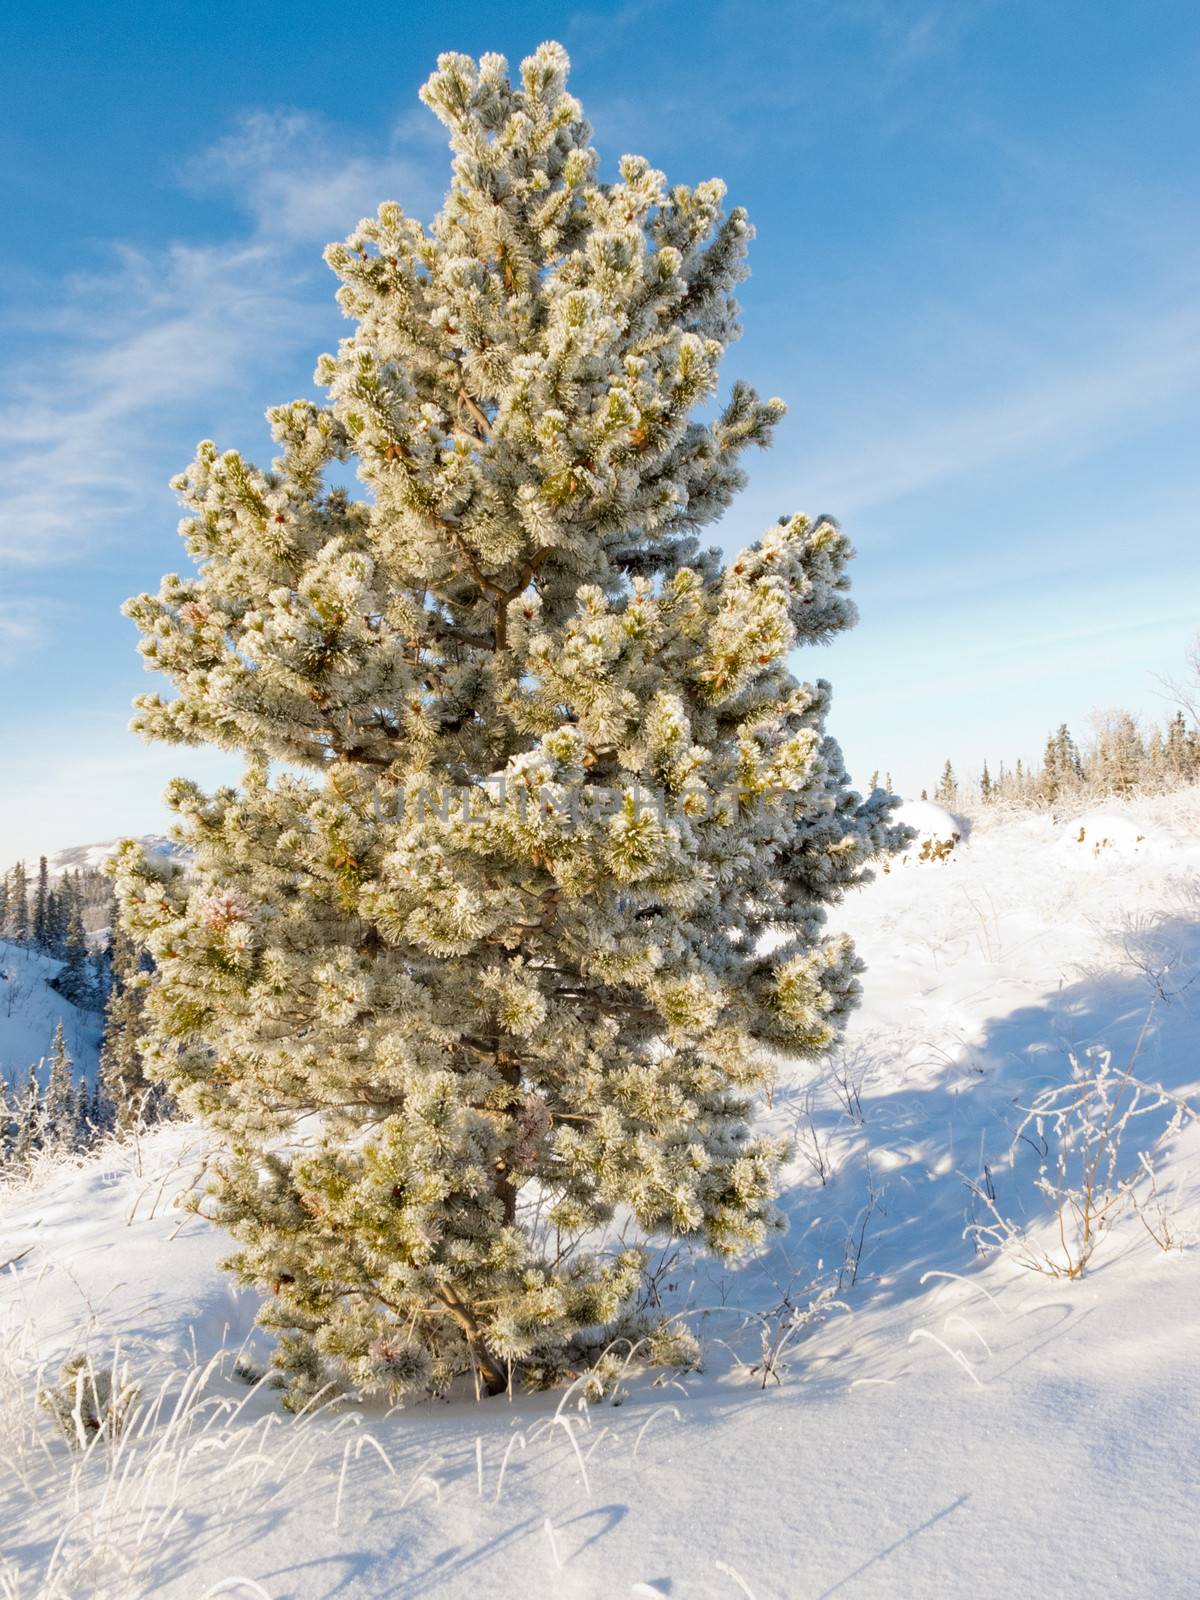 Hoar frost covered pine tree winter snow landscape by PiLens